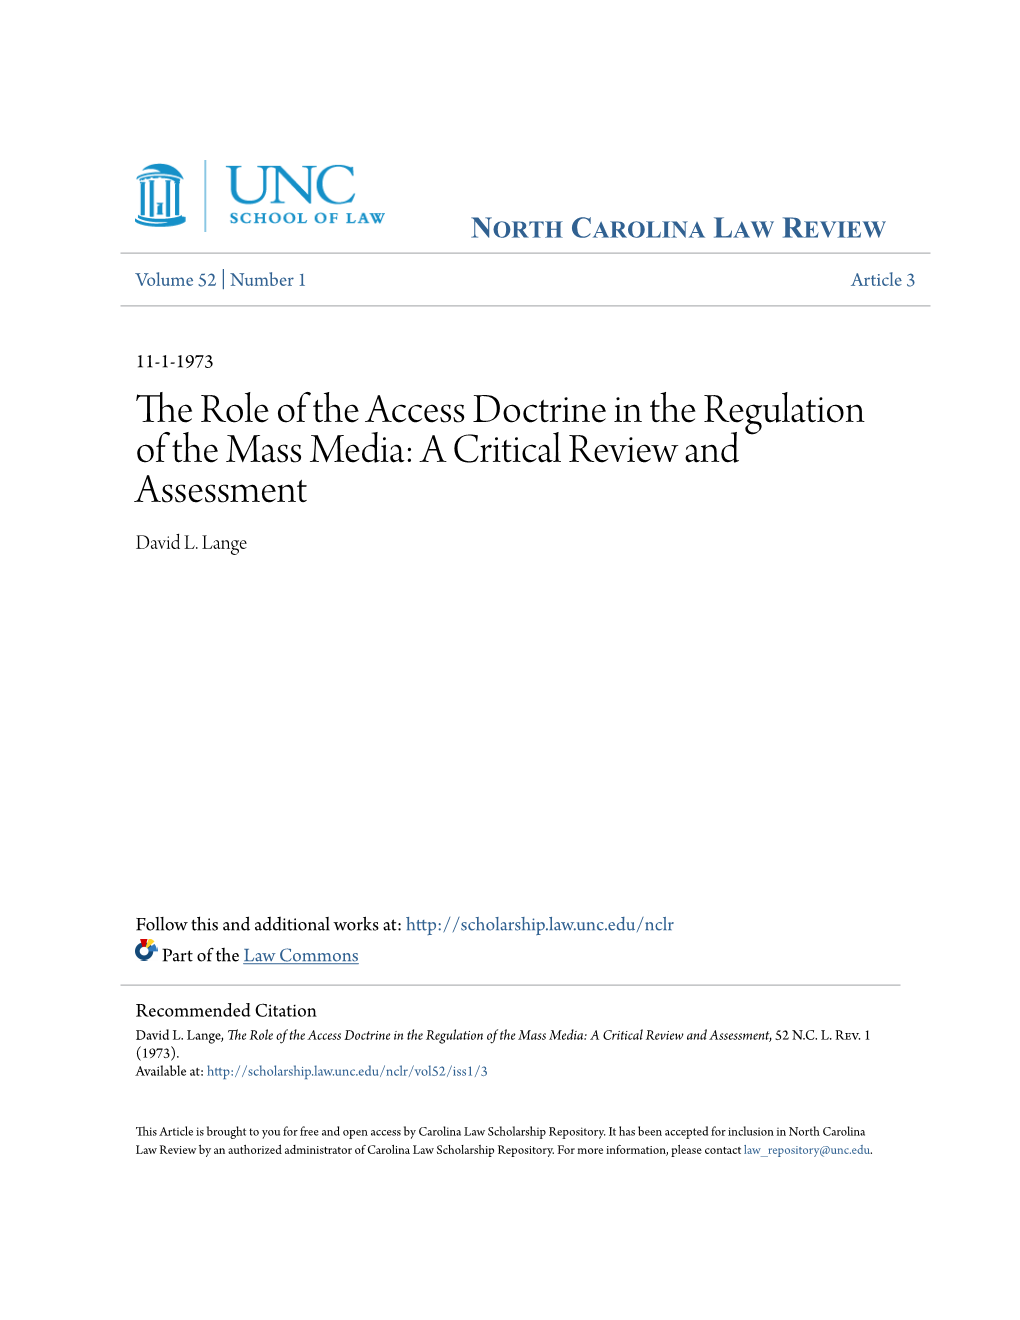 The Role of the Access Doctrine in the Regulation of the Mass Media: a Critical Review and Assessment David L